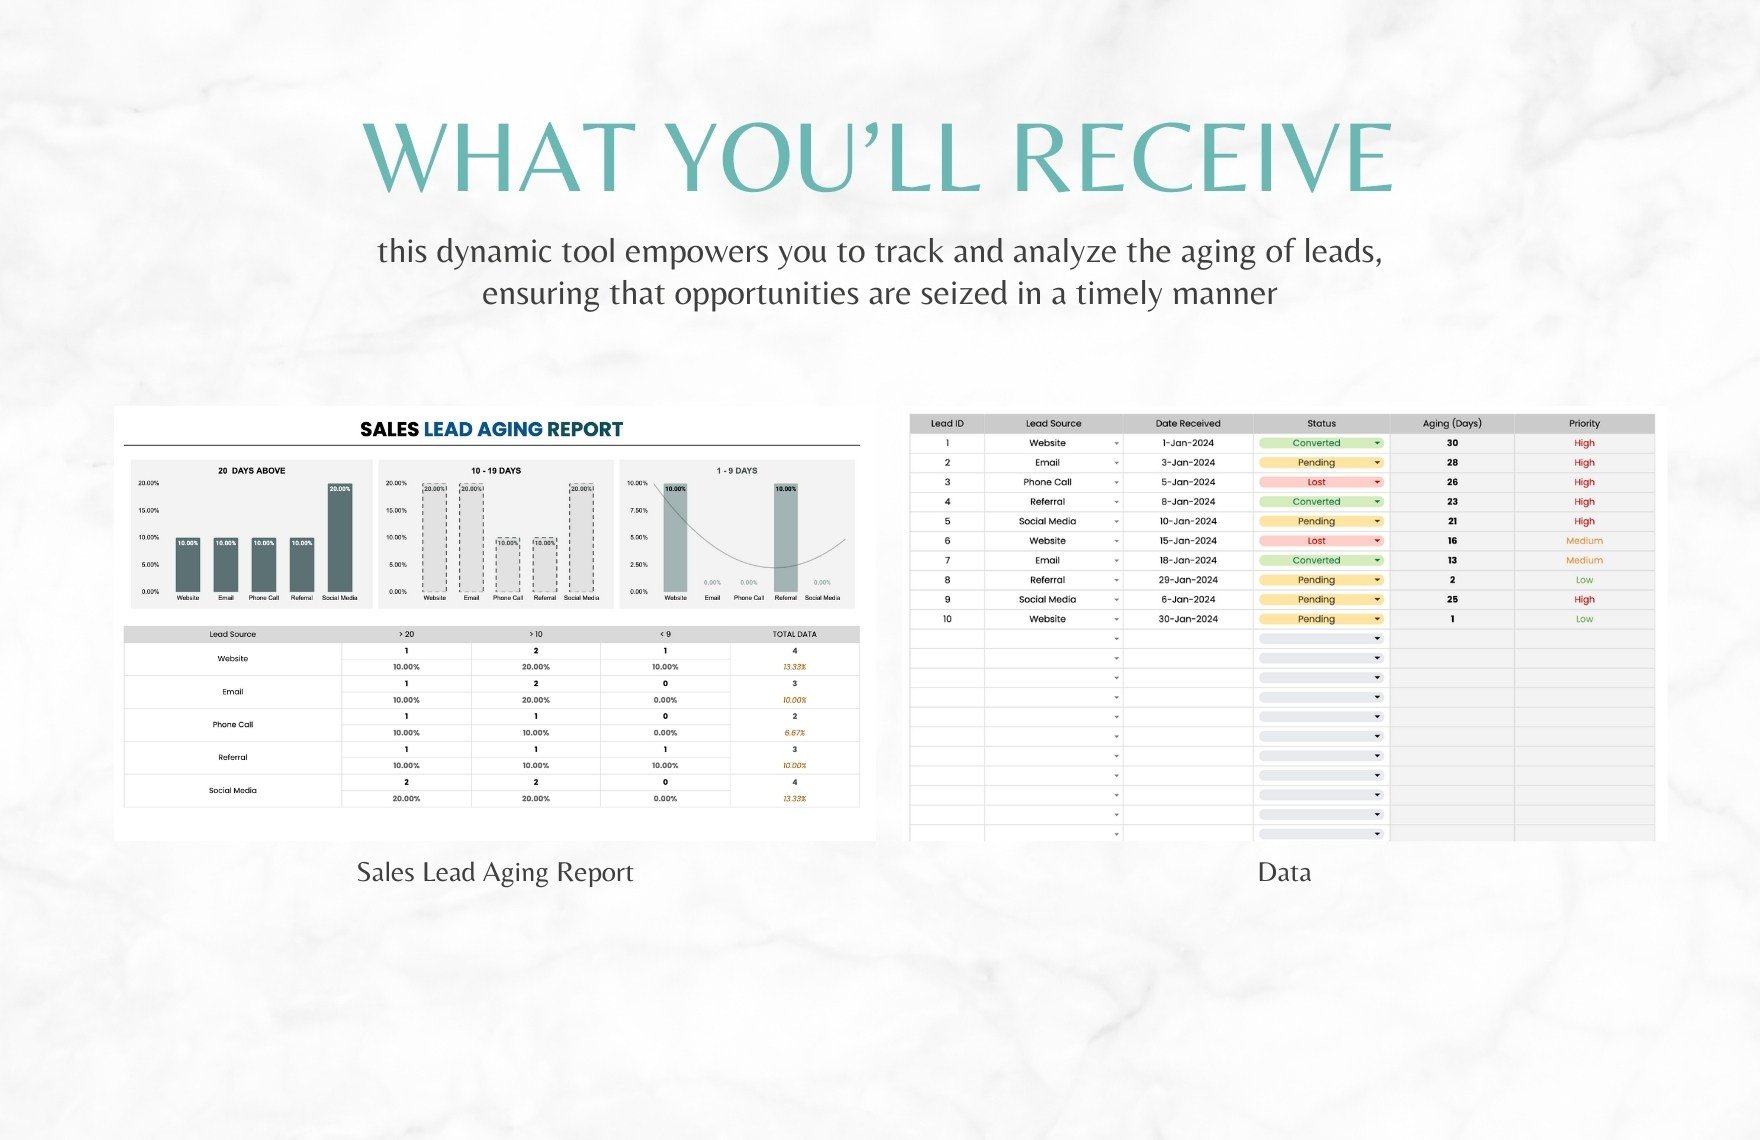 Sales Lead Aging Report Template